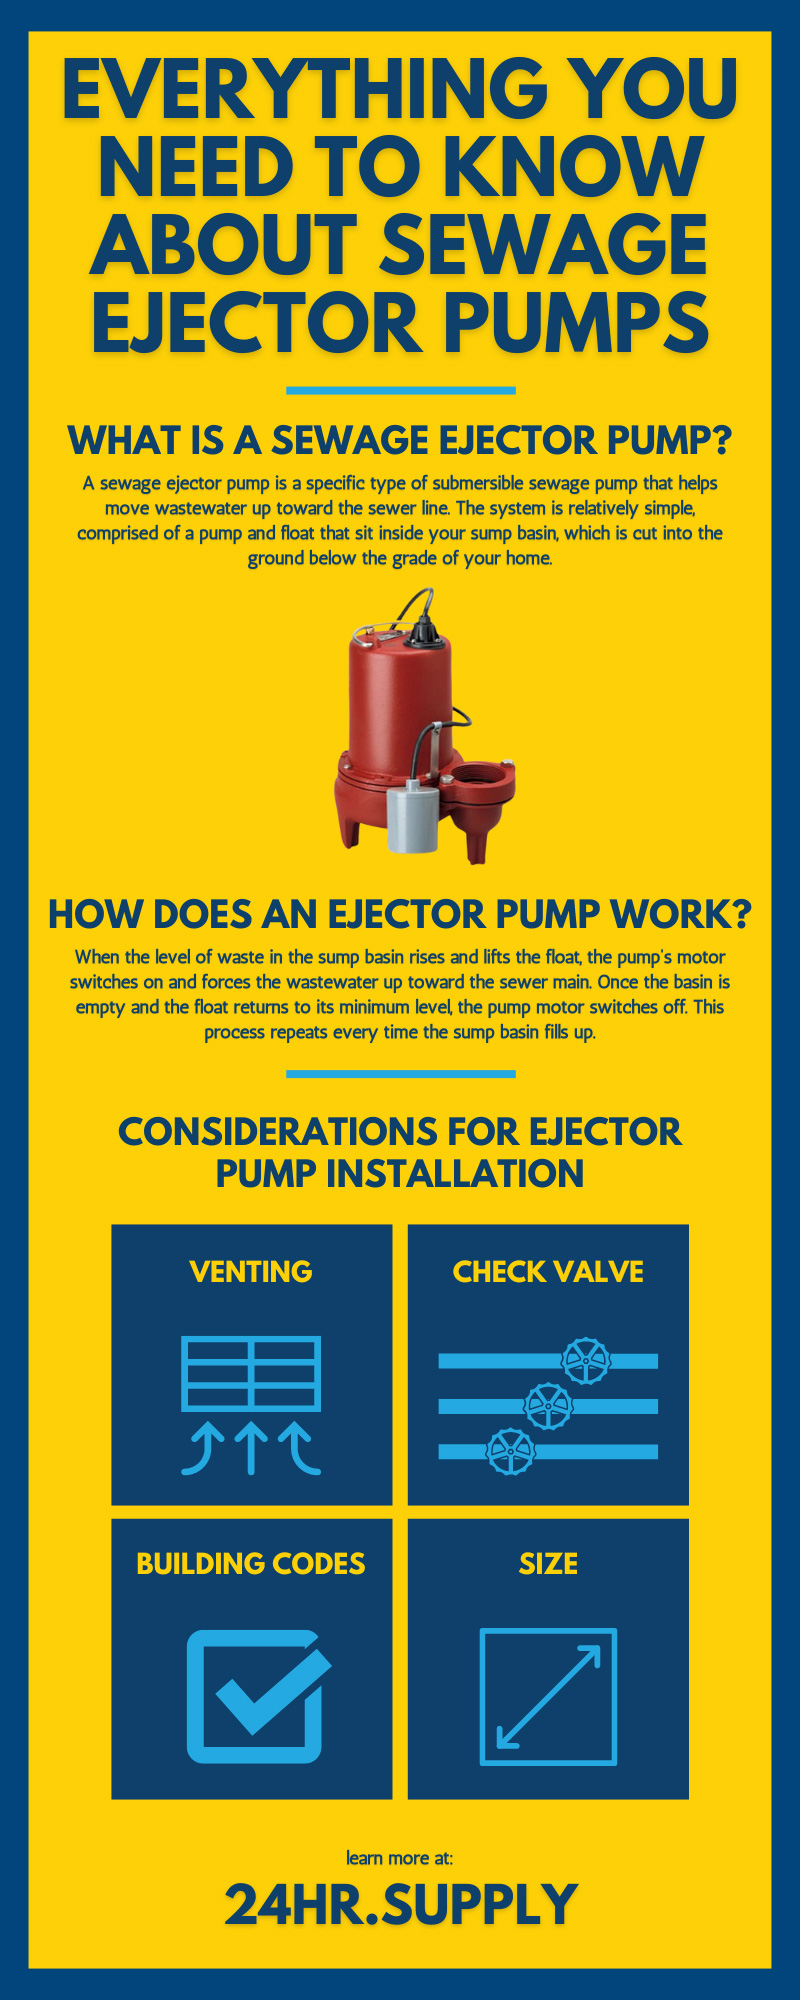 Everything You Need To Know About Sewage Ejector Pumps